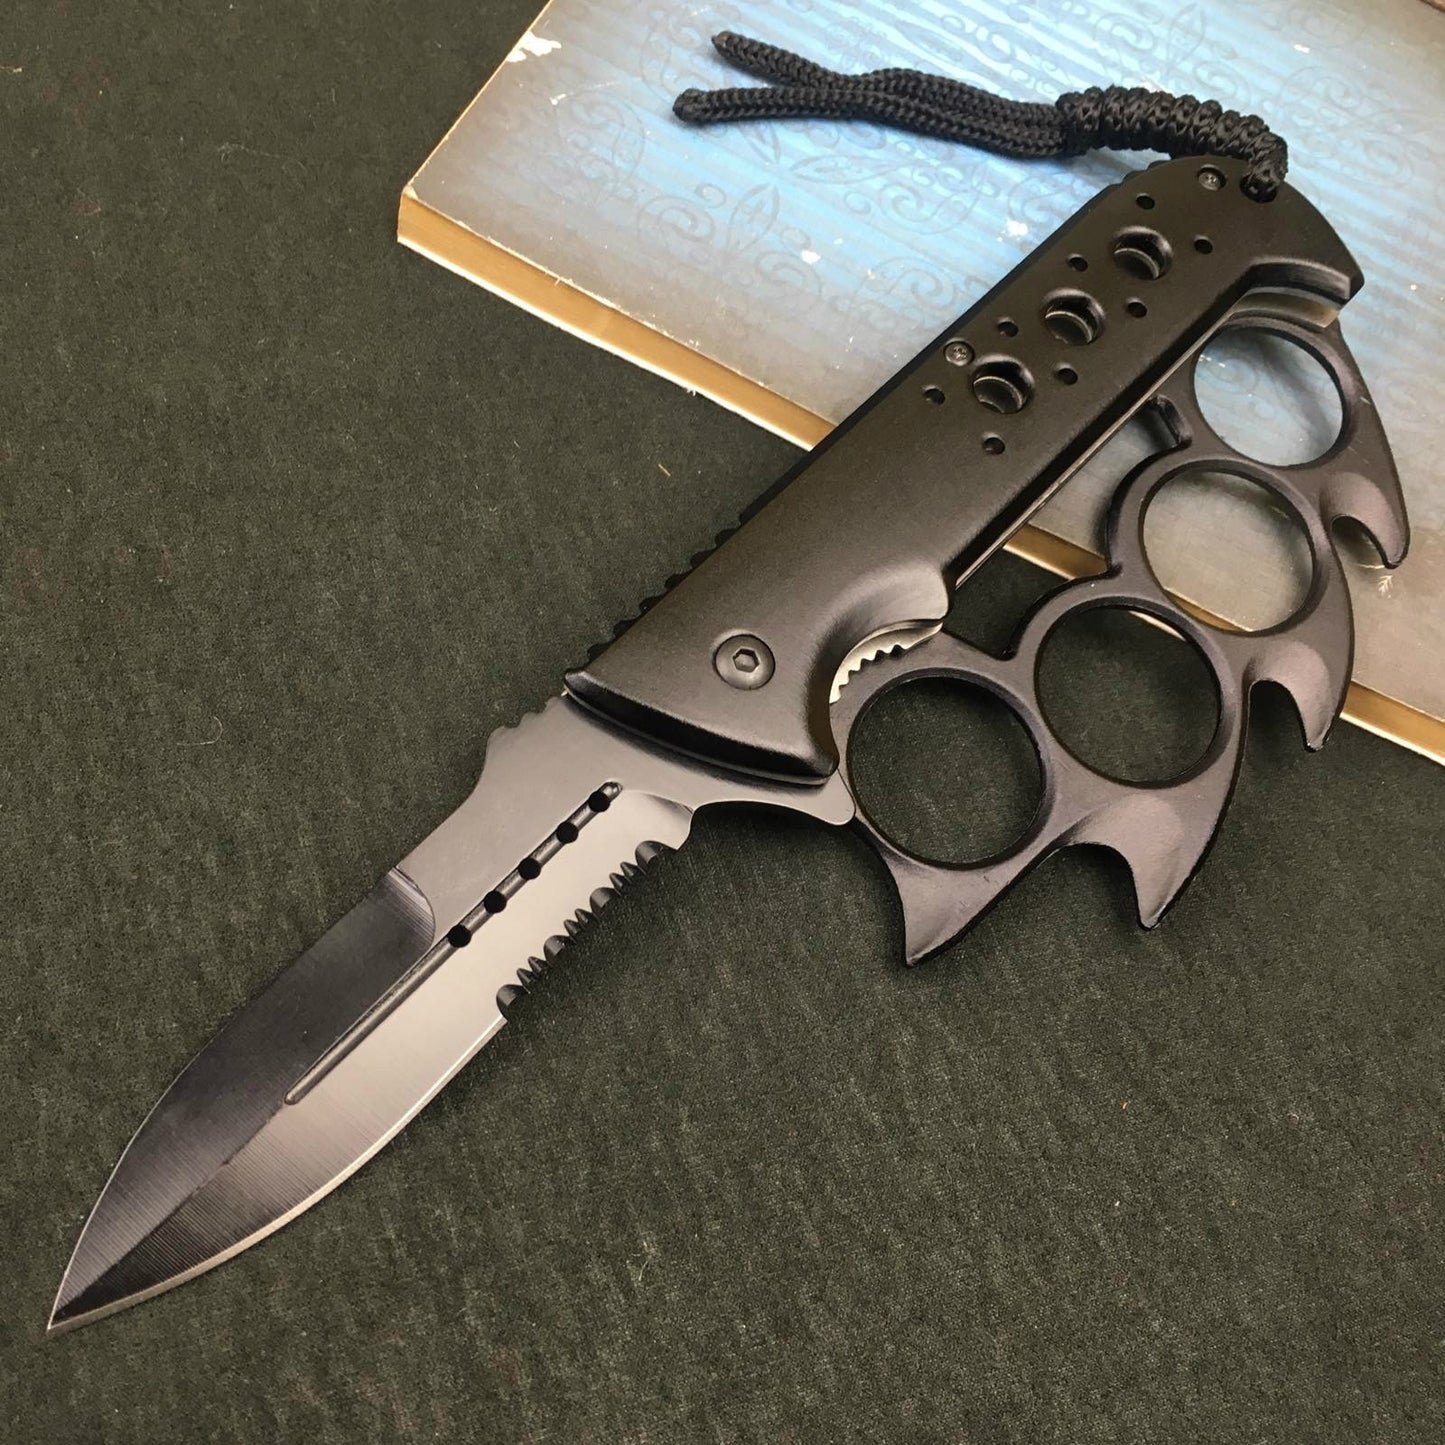 "7.5" COLD STEEL knuckle type 440C blade tactical spring assist to open folding pocket knife